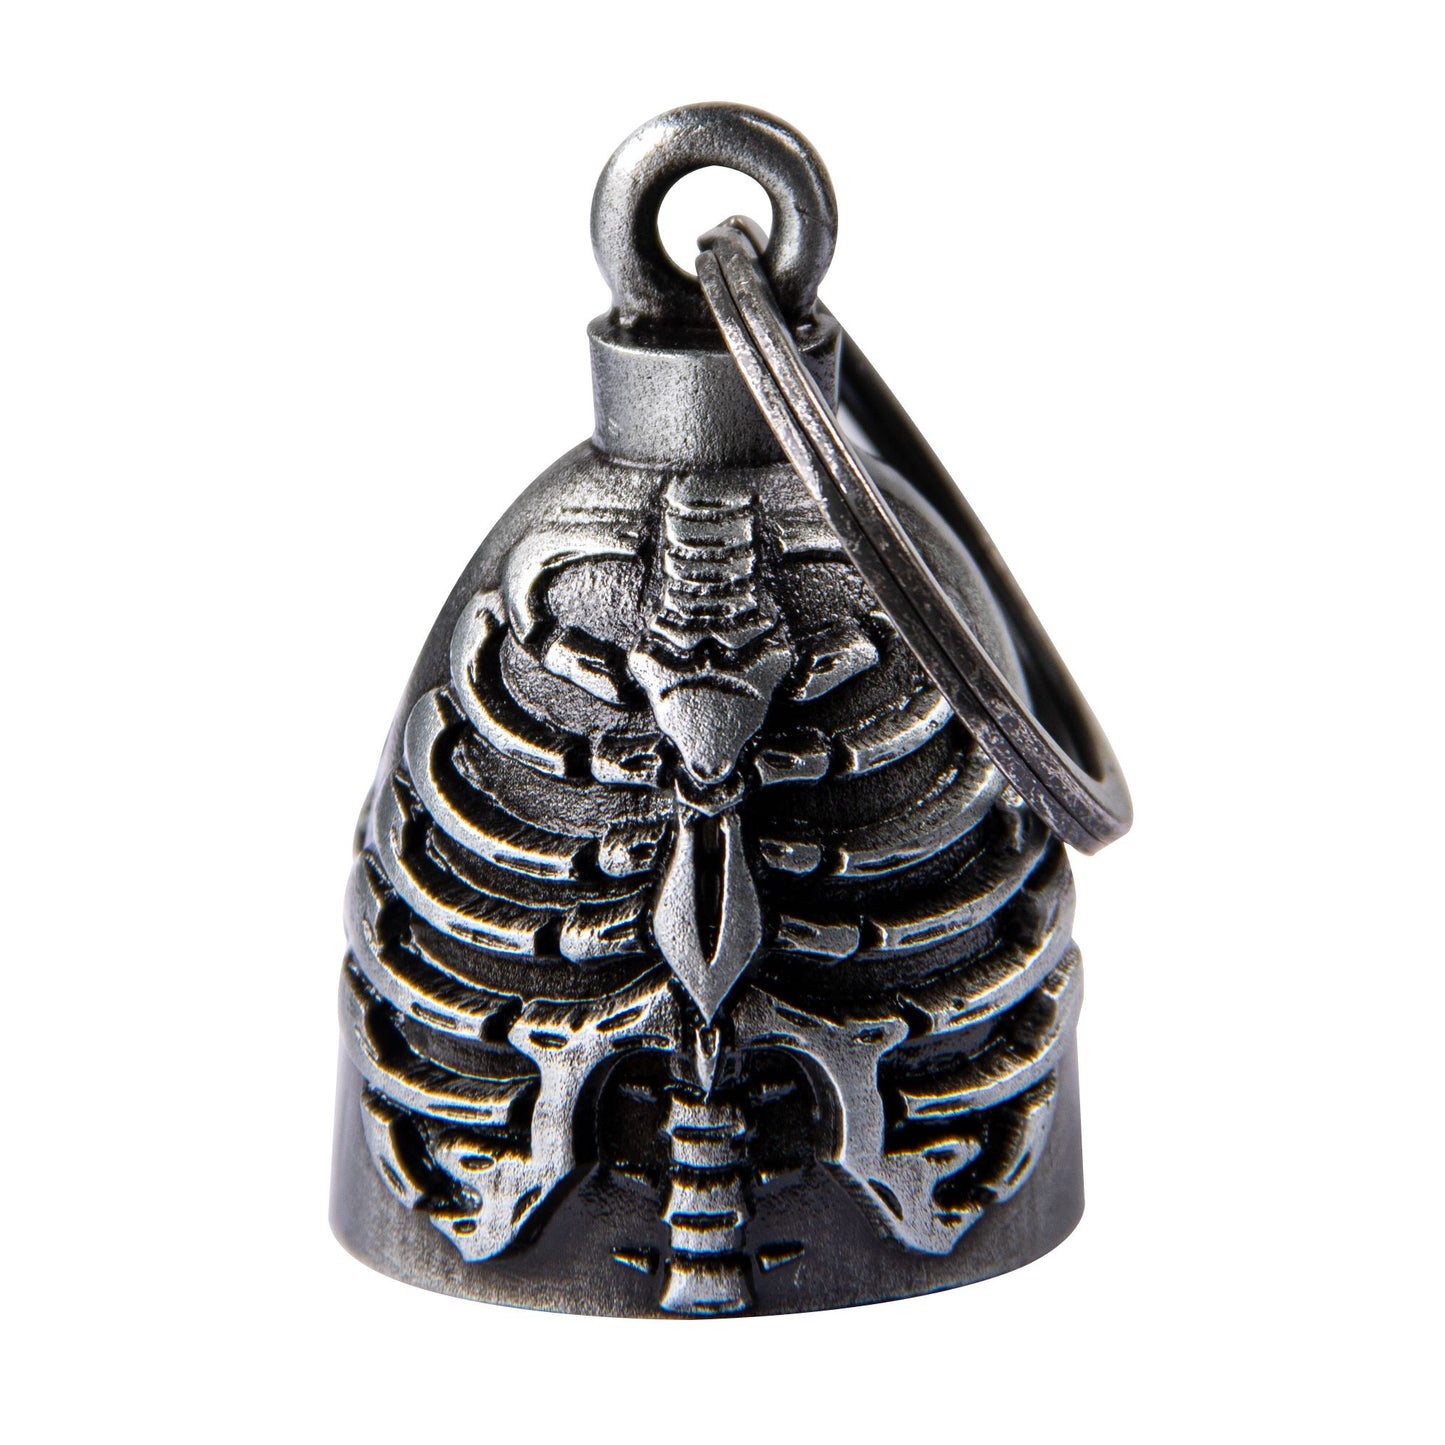 Rib Cage Motorcycle Bell